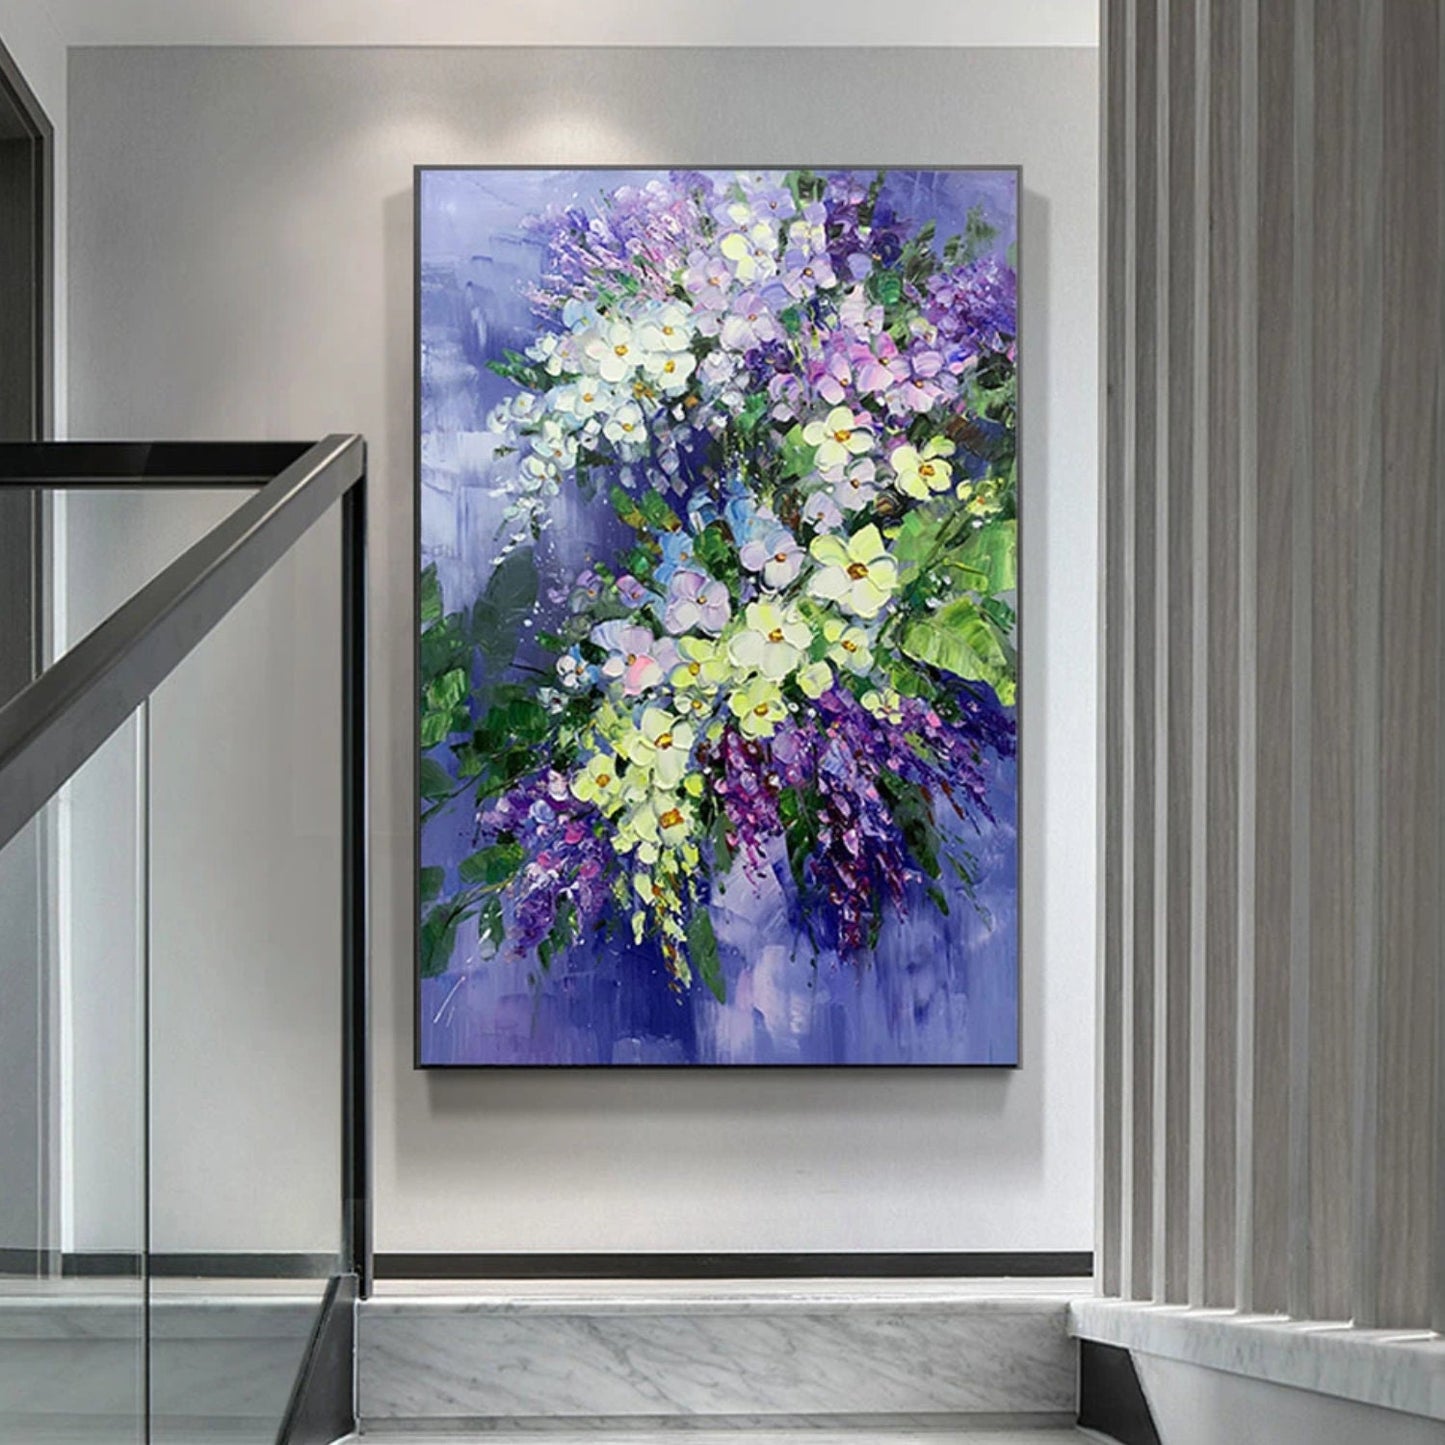 Elegant Orchid Flowers 100% Hand Painted Wall Art